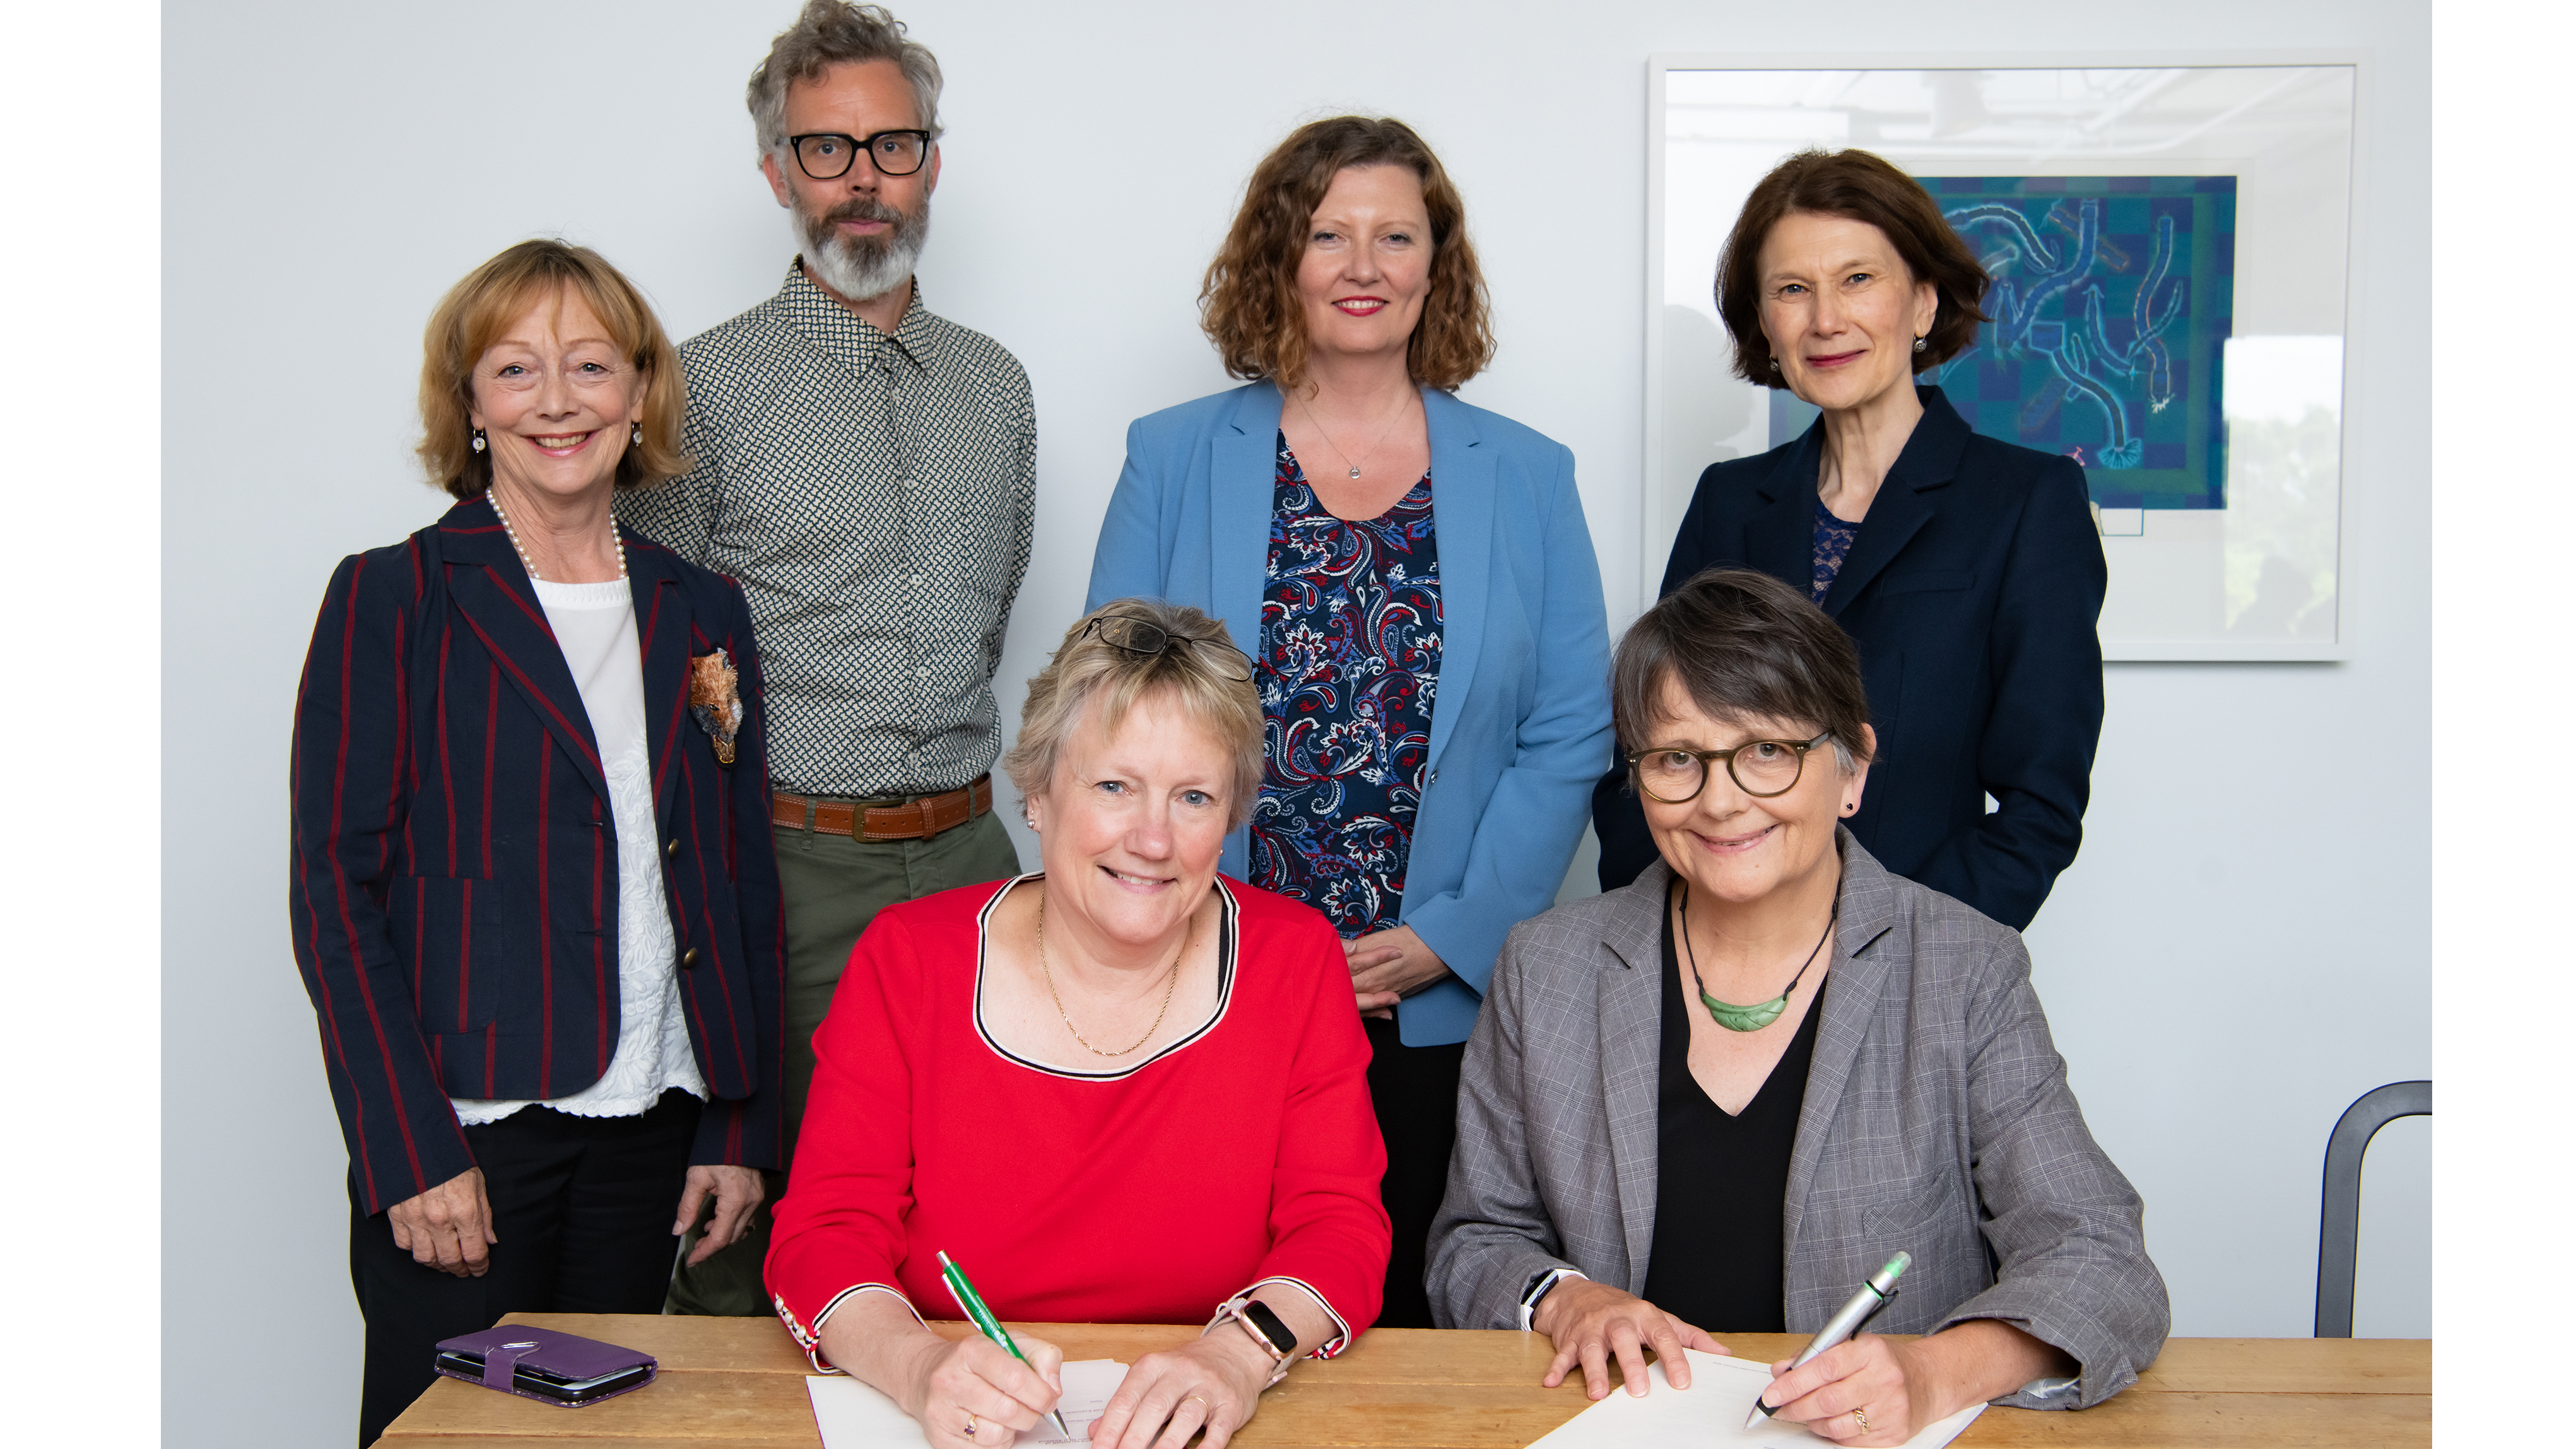 Two women sit at a table, each signing a document posing for the camera. Four other peoples, 3 women and 1 man, stand around them. Standing (L-R): Rosalene Fogel (Development Office), Dr Dugal McKinnon (NZSM), Steff Kemp (CMNZ), Professor Jennifer Windsor (PVC, FHSS and FoE). Sitting (L-R): Patricia Danver (ED, Victoria Foundation, Development Office), Catherine Gibson (CE, CMNZ).